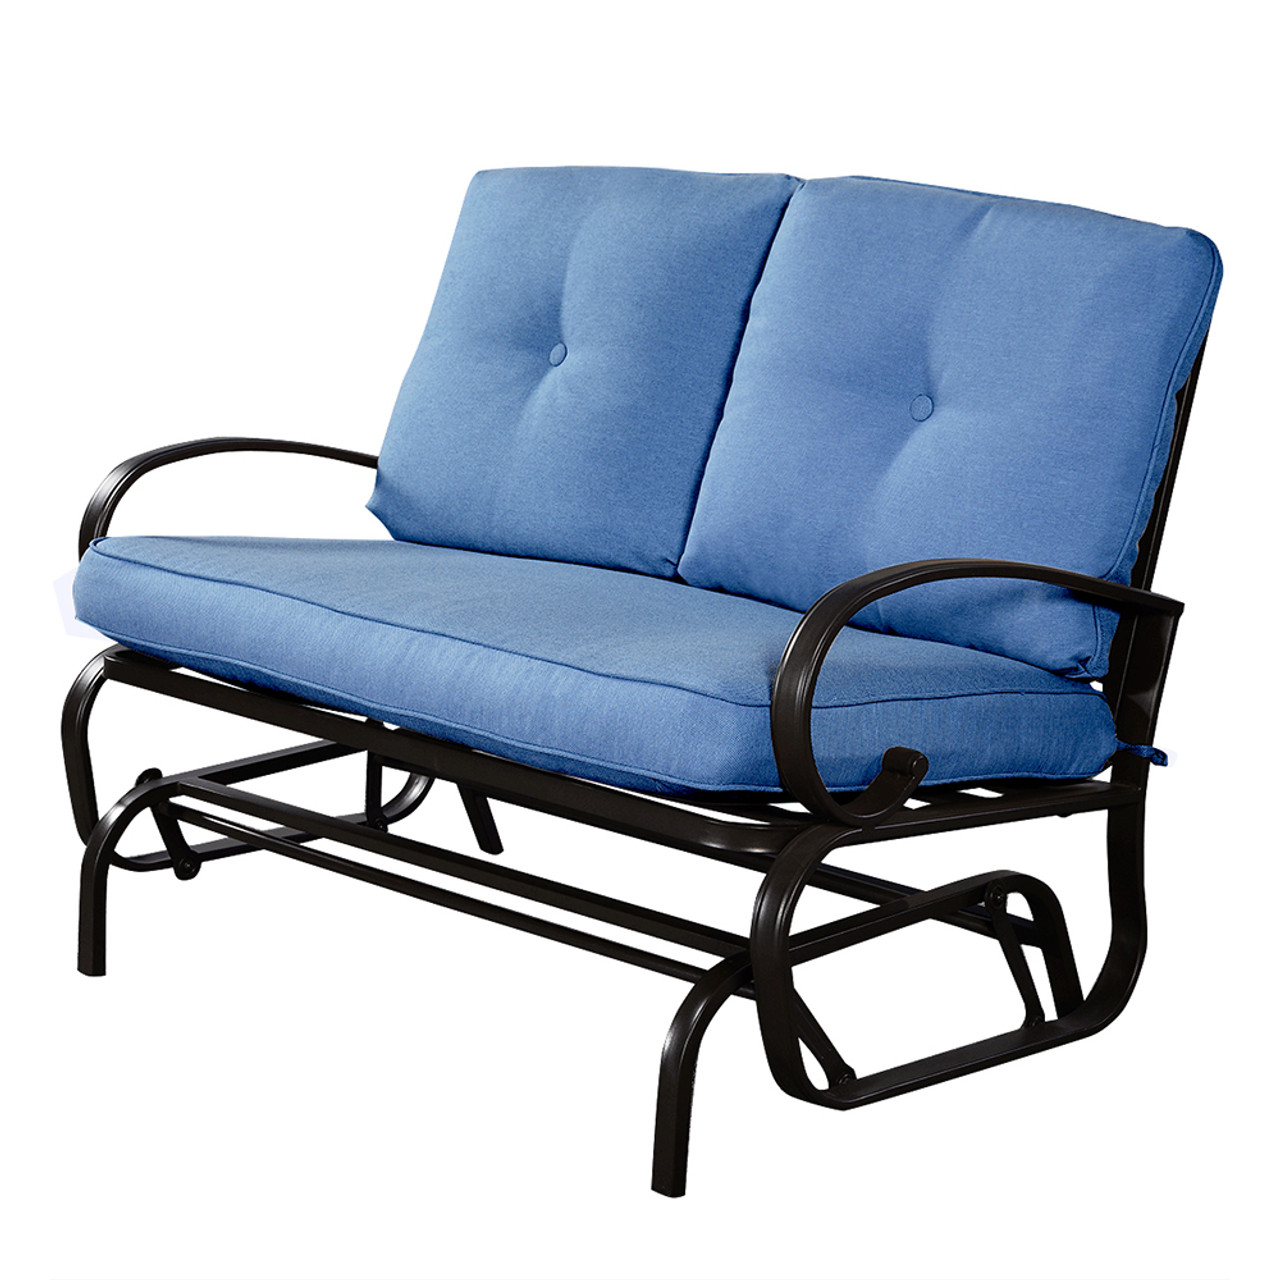 Blue Cushioned Steel Frame Gliding Patio Bench product image